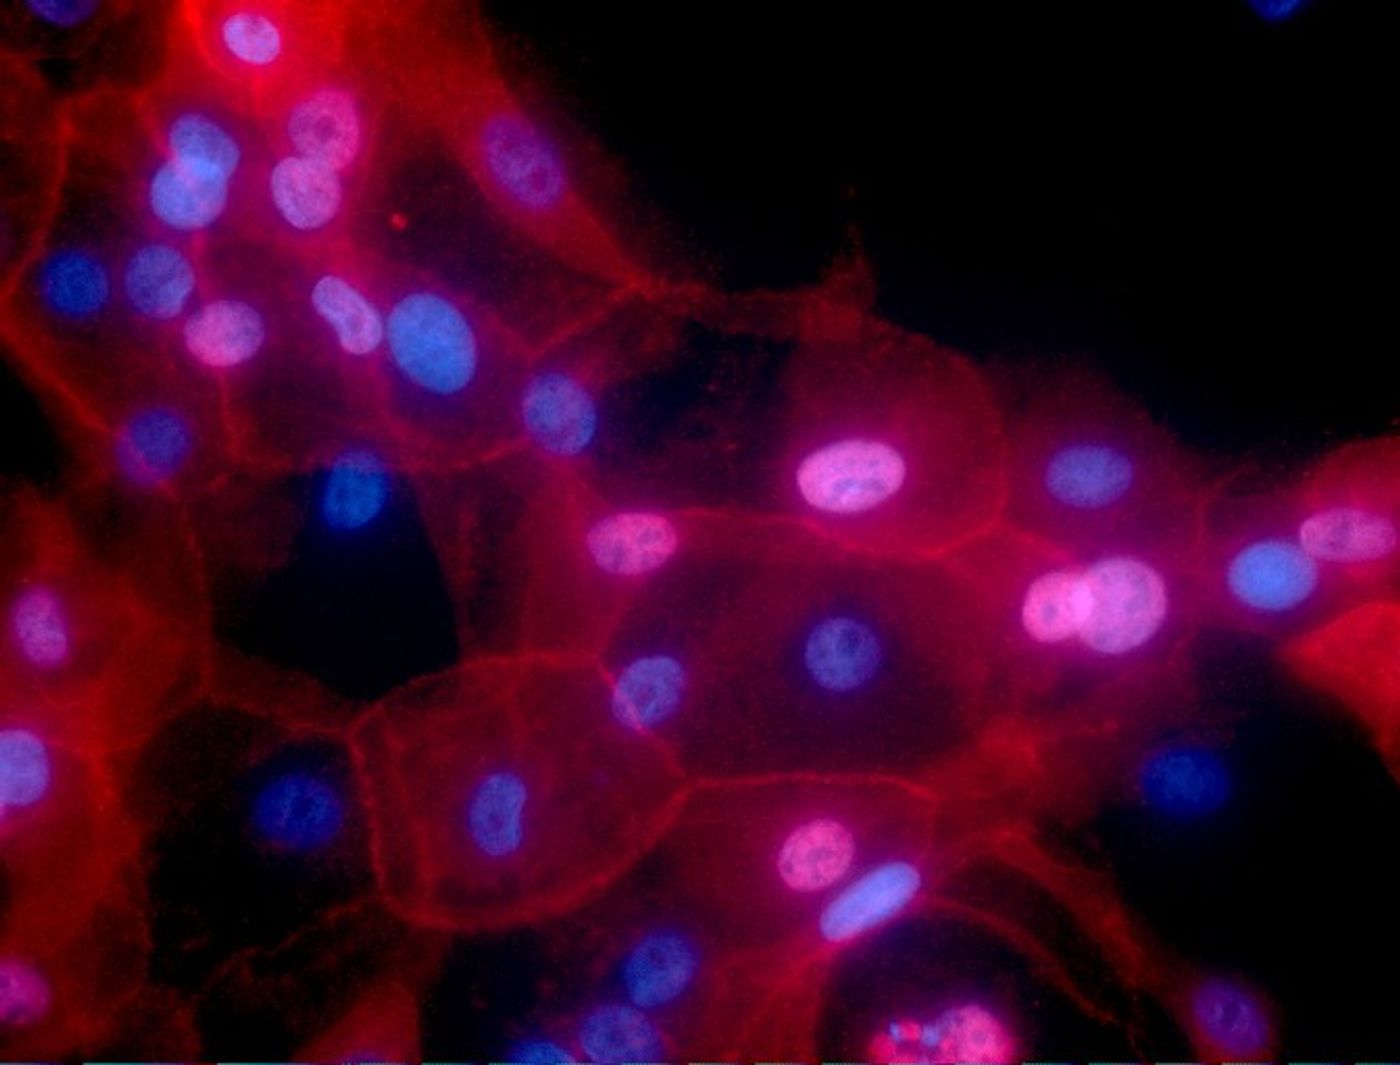 Human breast cancer cells in culture. / Image credit: National Cancer Institute / Georgetown Lombardi Comprehensive Cancer Center Creator:Ewa Krawczyk